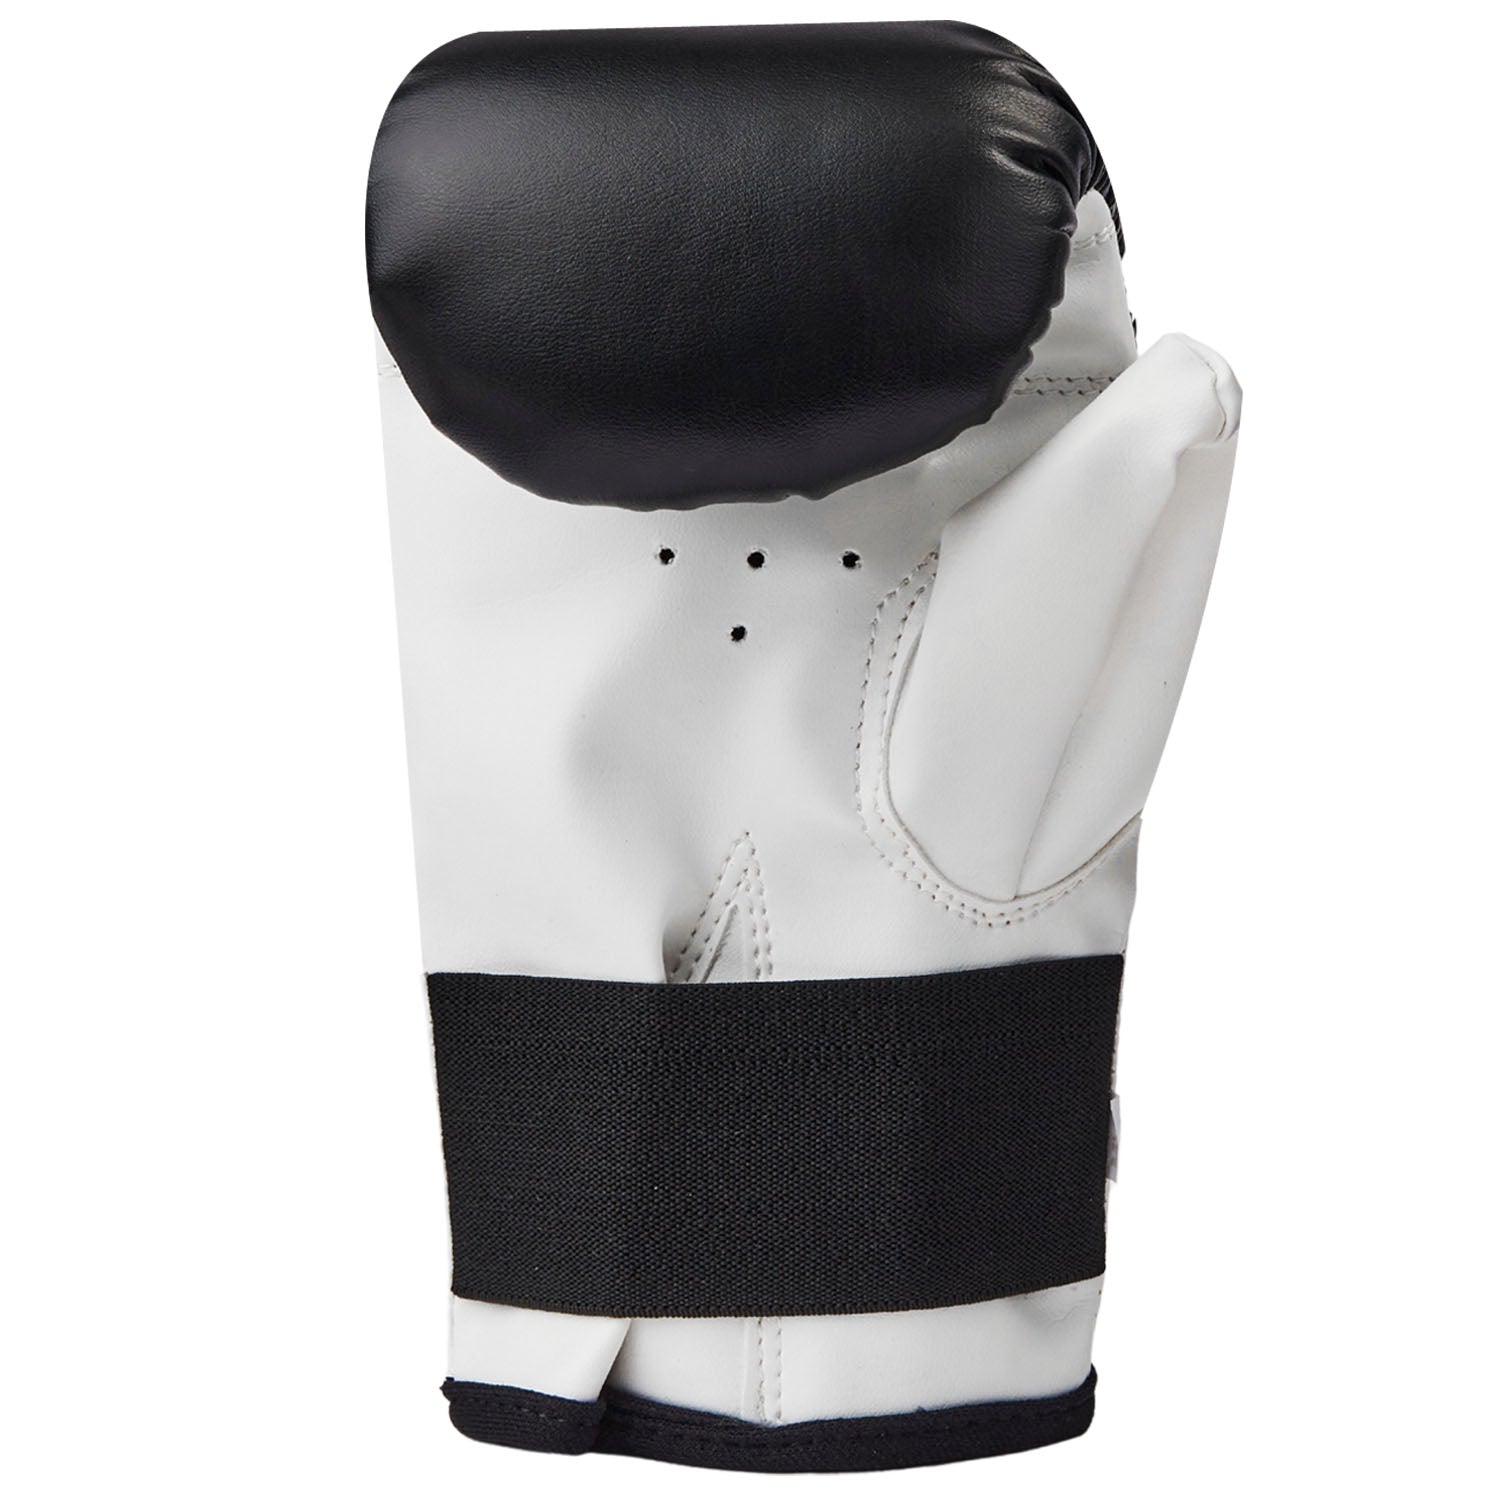 Best Boxing Punching Gloves